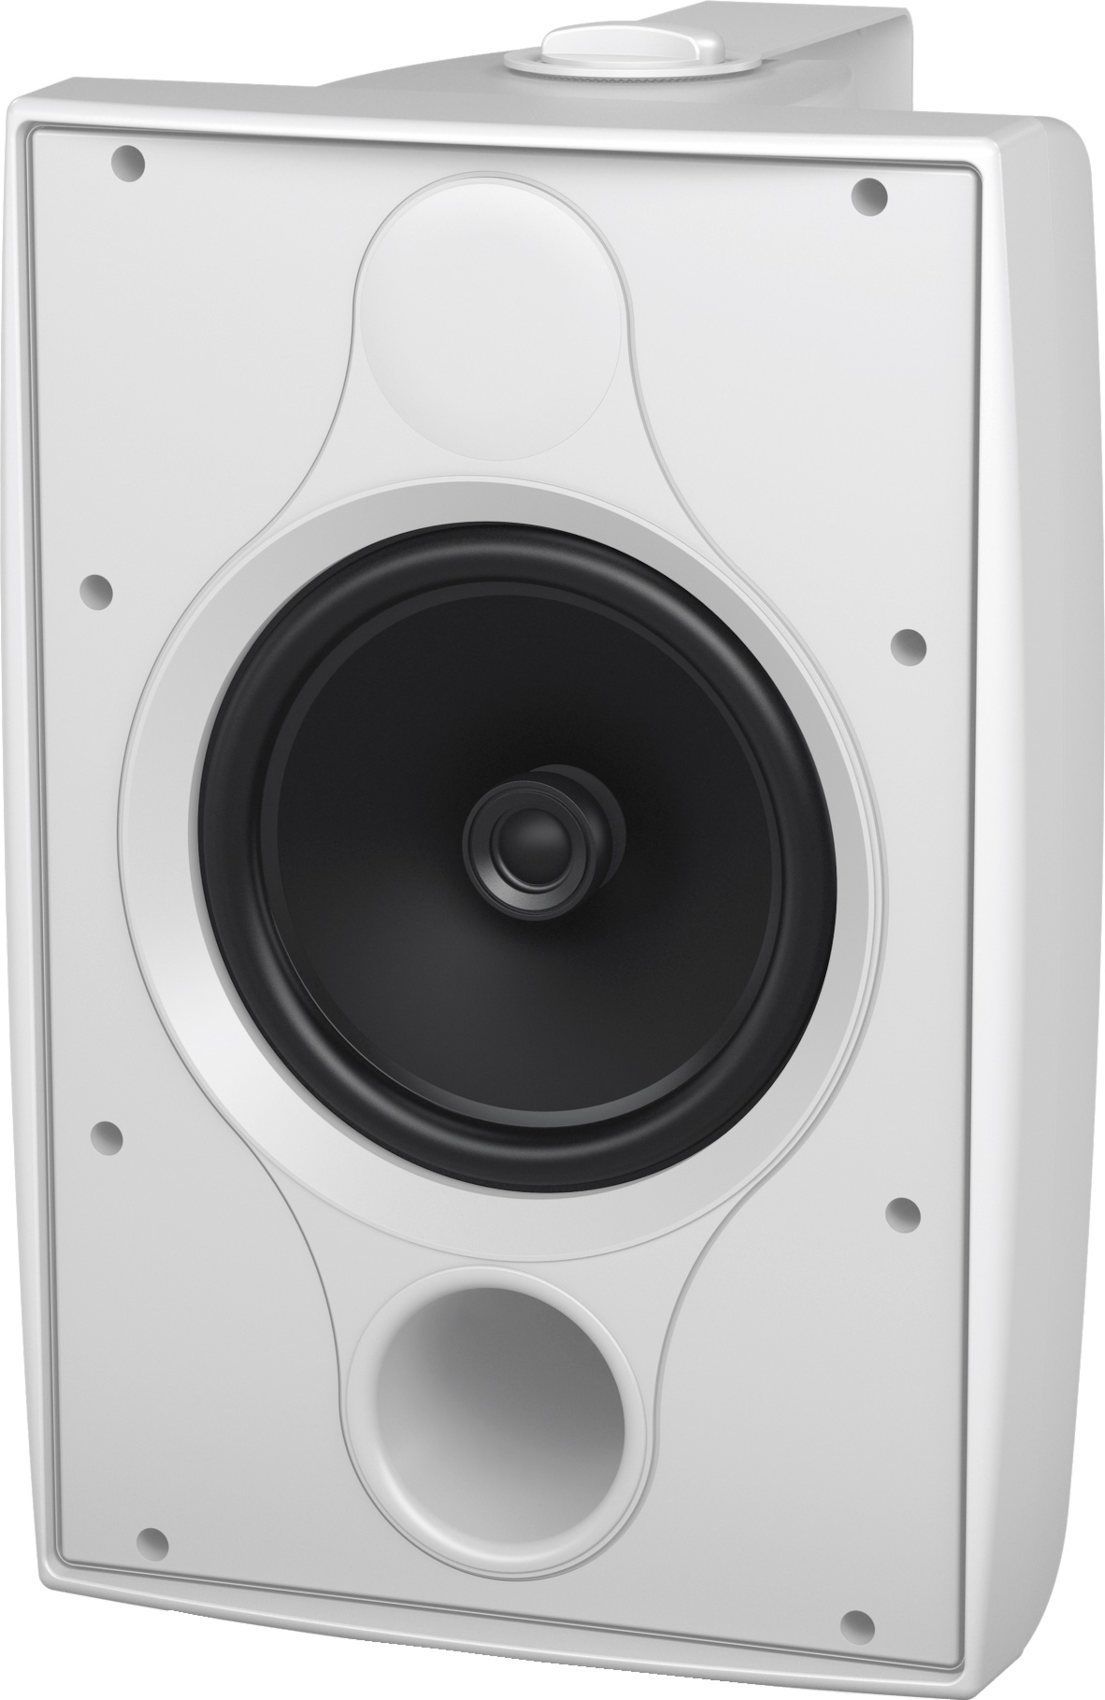 Tannoy DVS 8-WH - фото 6